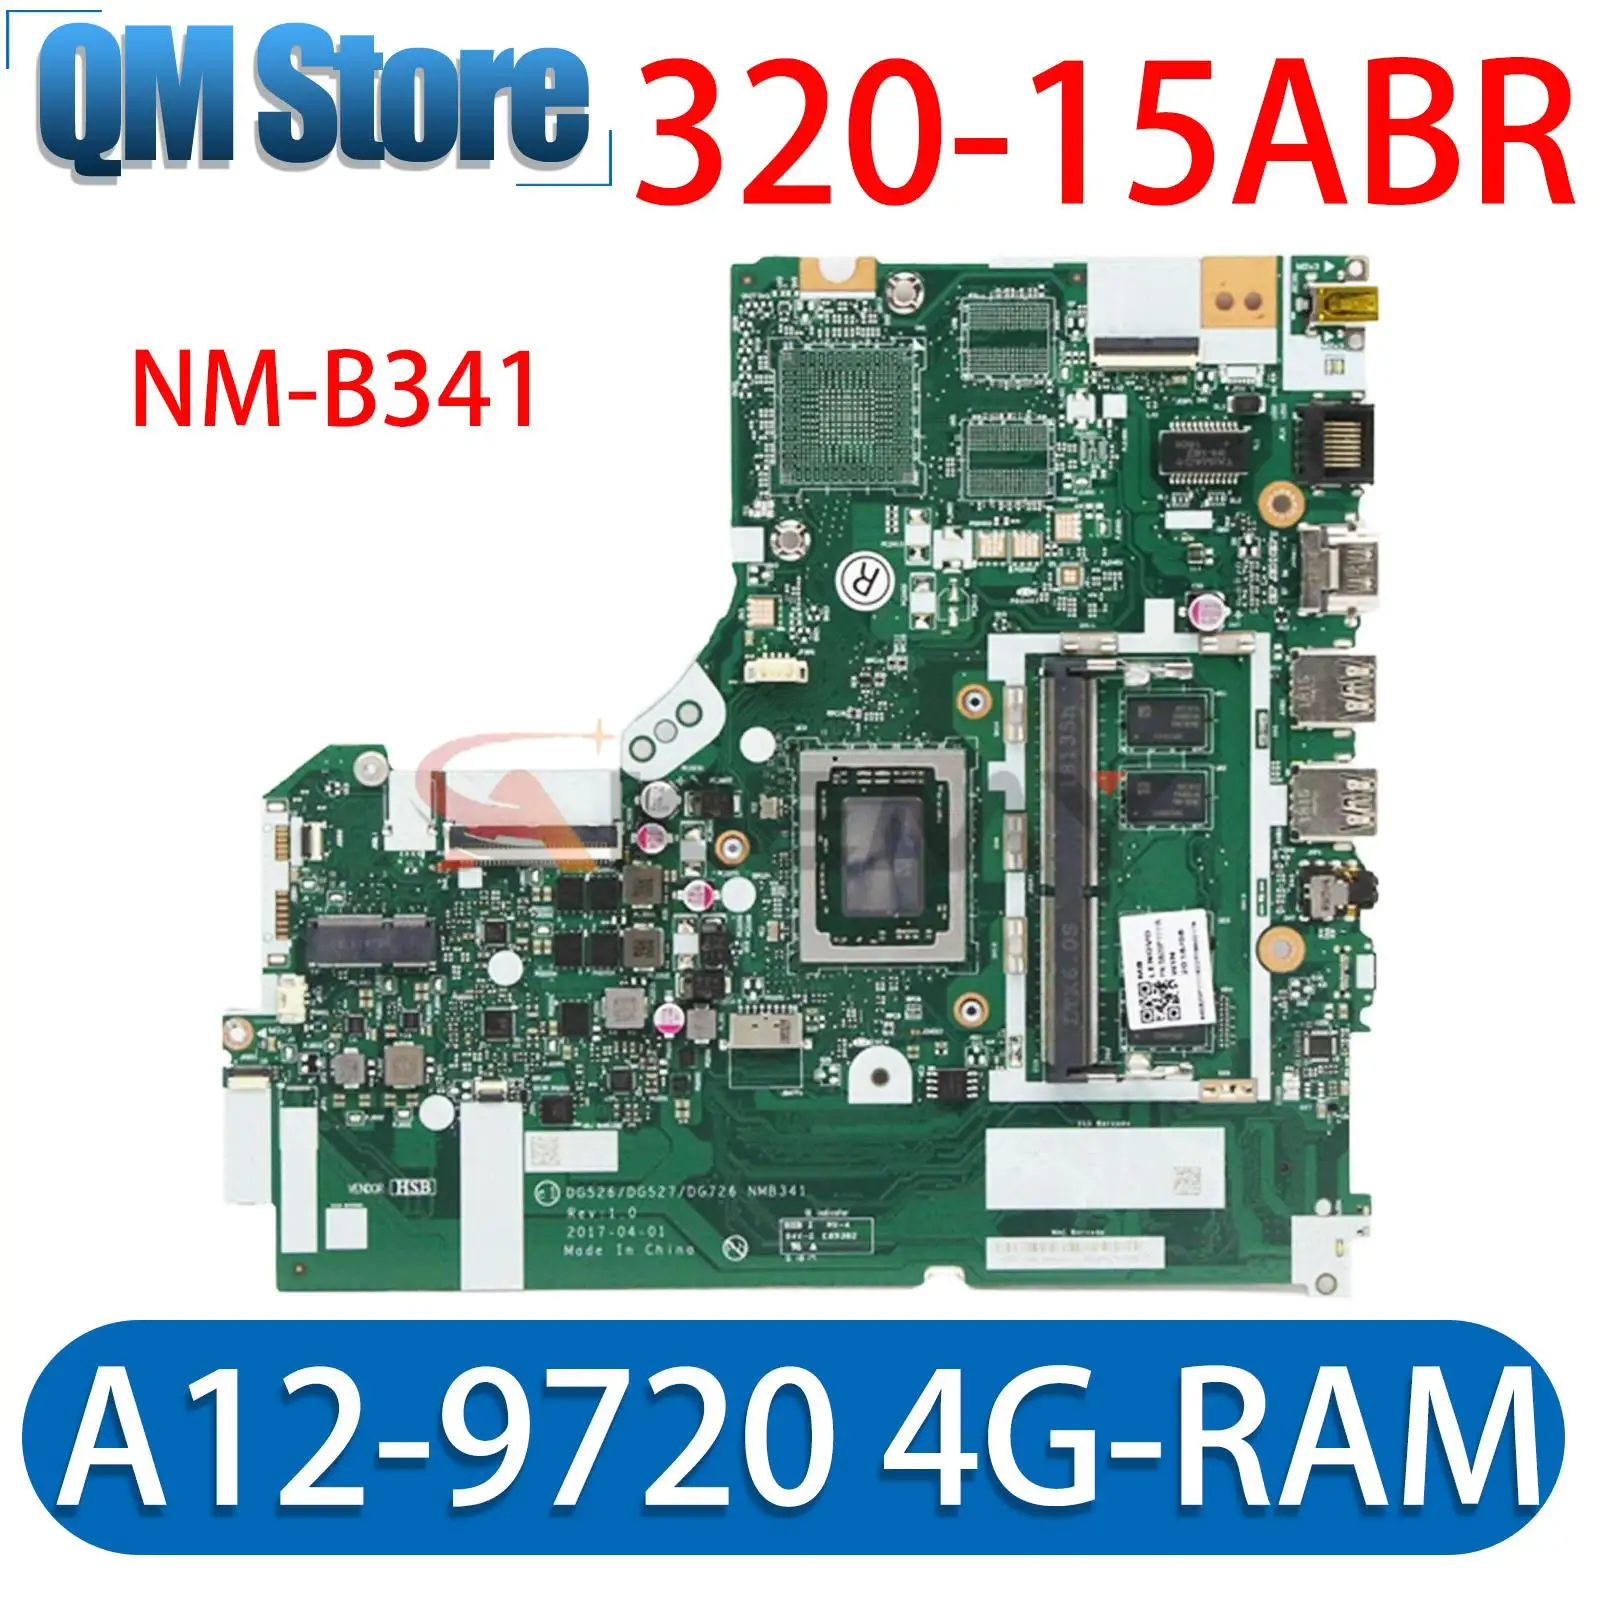 

5B20P11088 For Lenovo IdeaPad 320-15ABR Laptop Motherboard DG526/DG527/DG726 NMB341 NM-B341 With A12-9720 4G-RAM 100% Tested OK